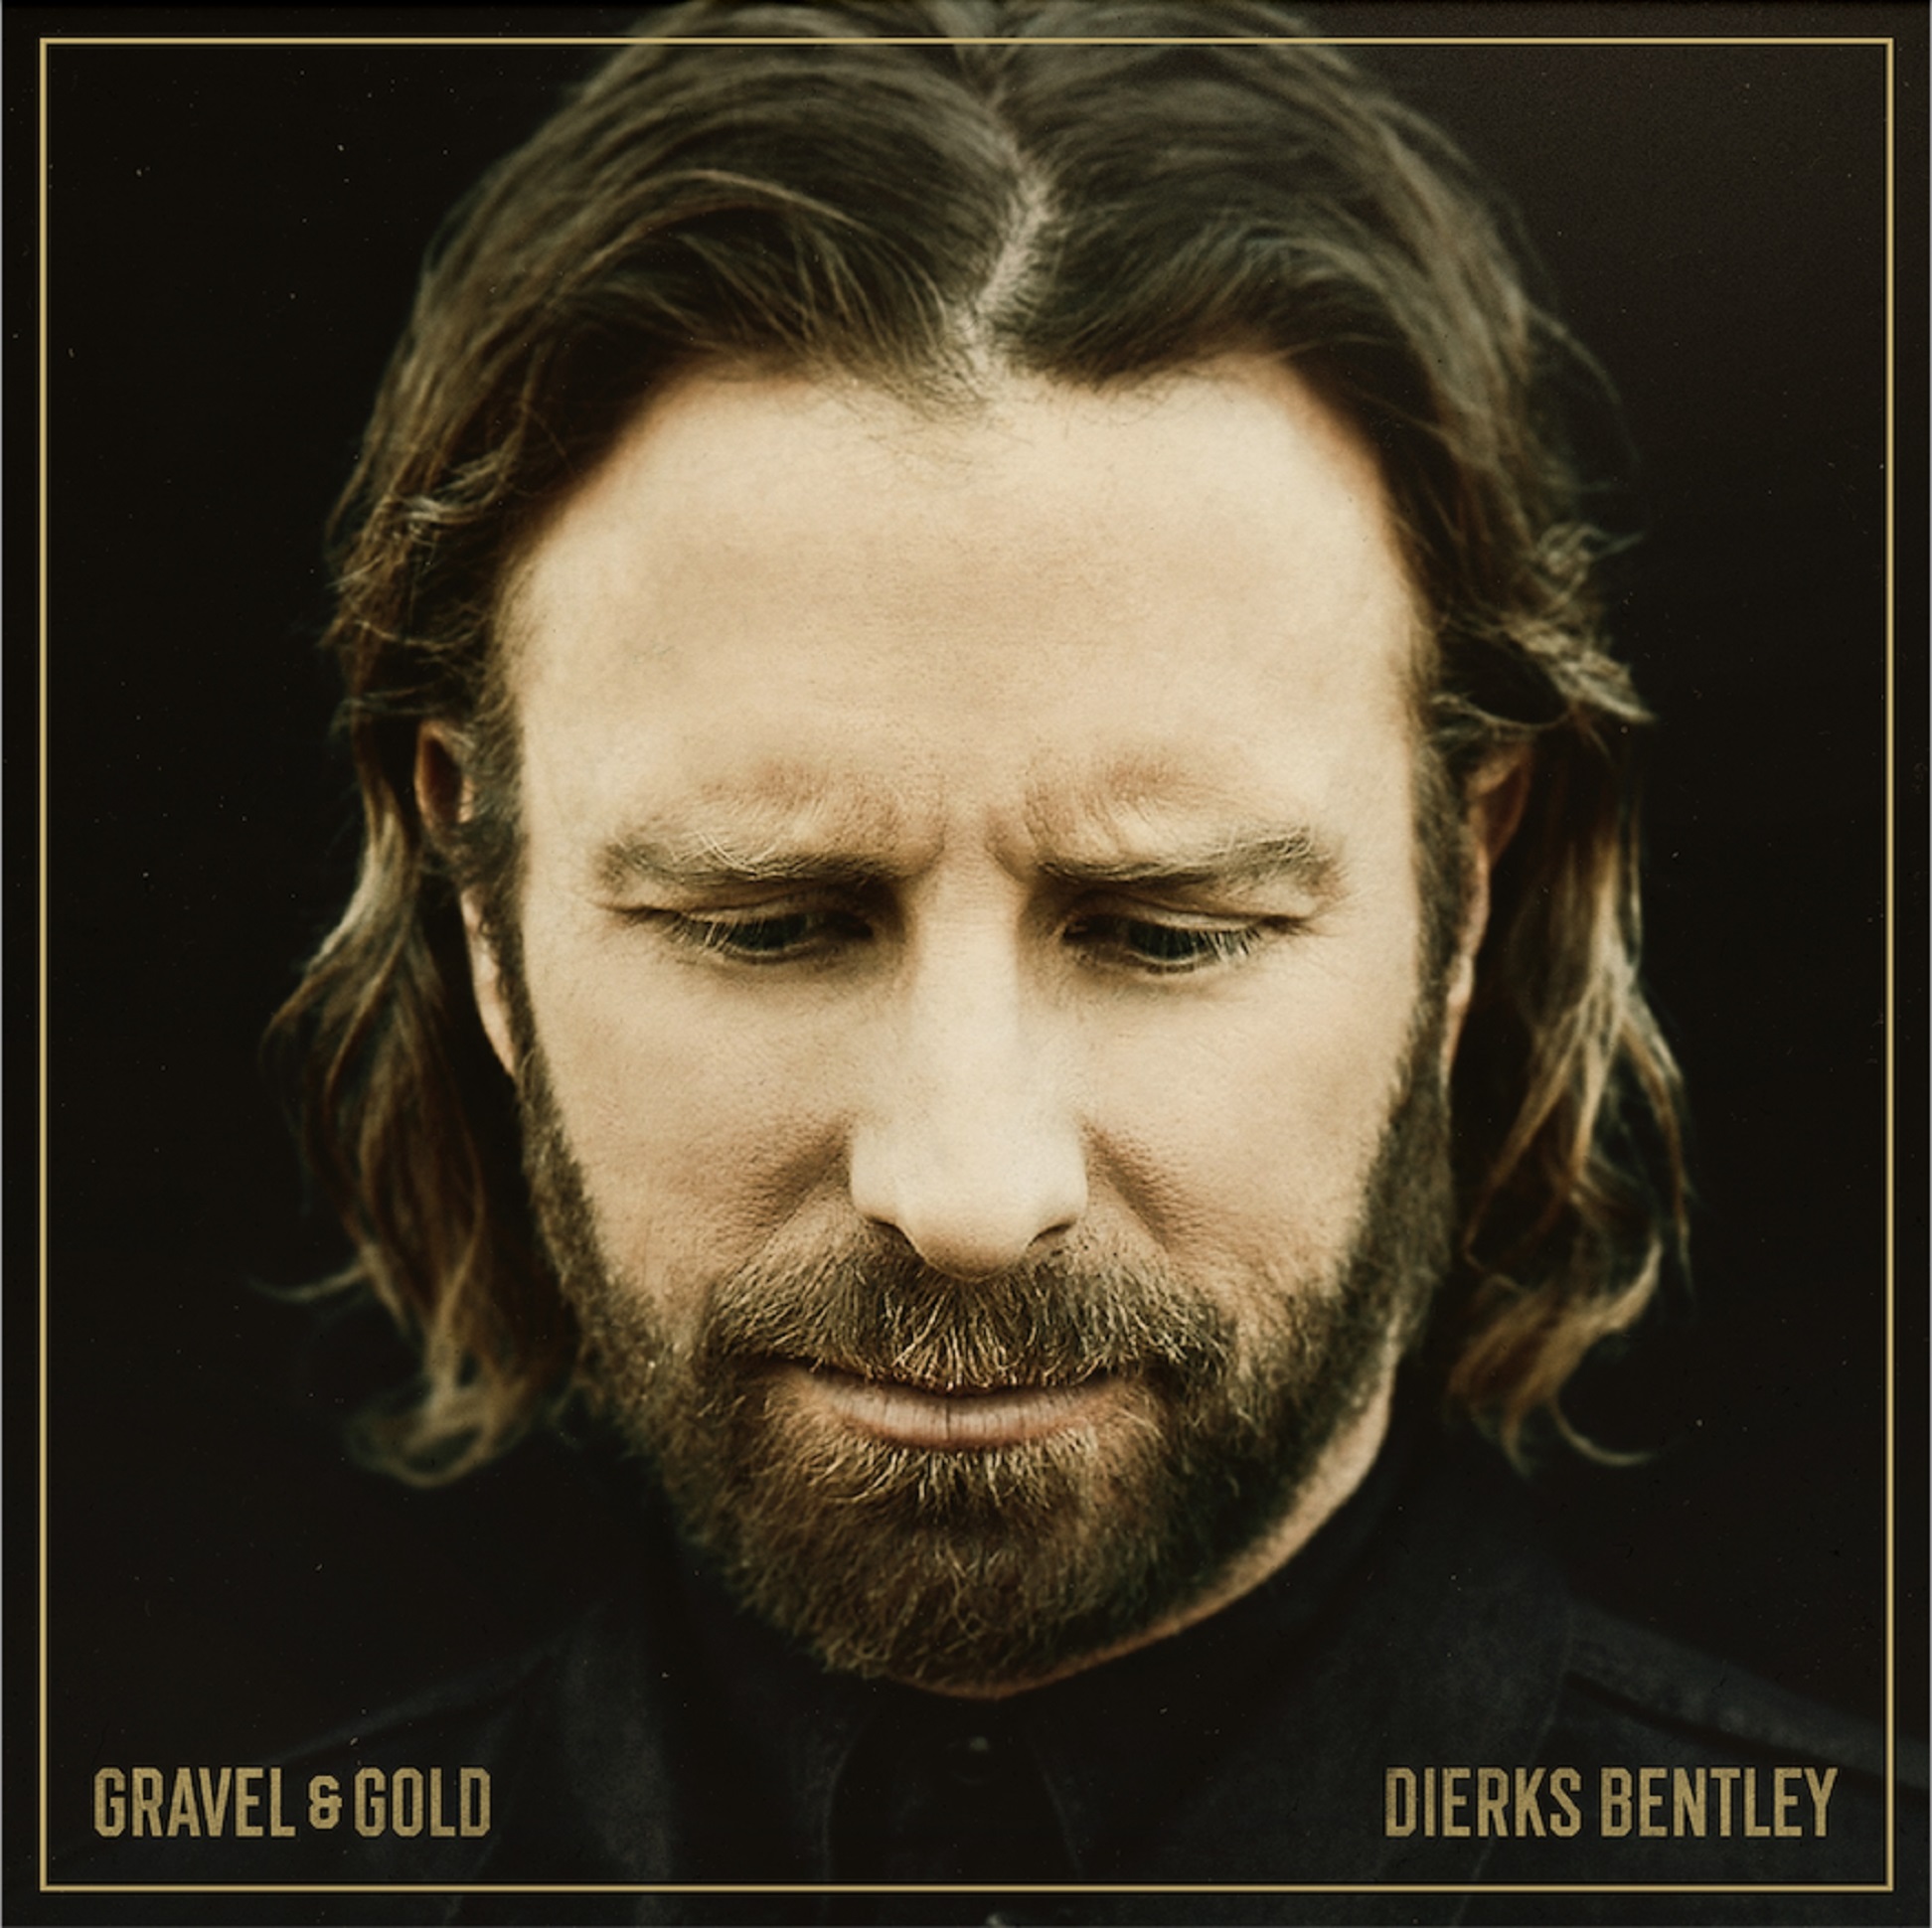 Dierks Bentley Details GRAVEL & GOLD - Out Feb. 24